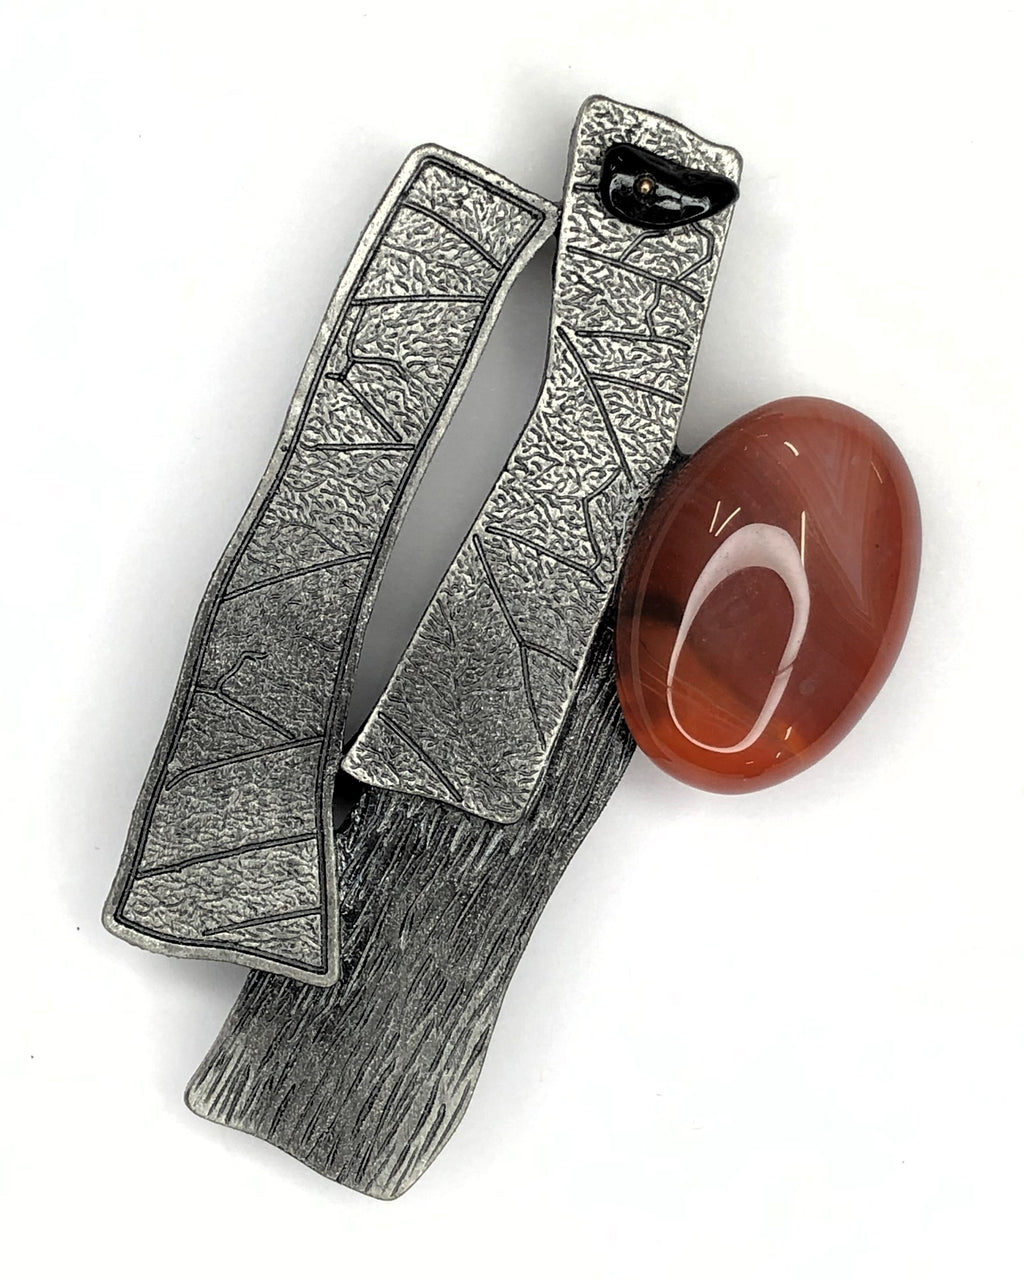 Abstract brushed metal shapes with rust coloured stone brooch at erika